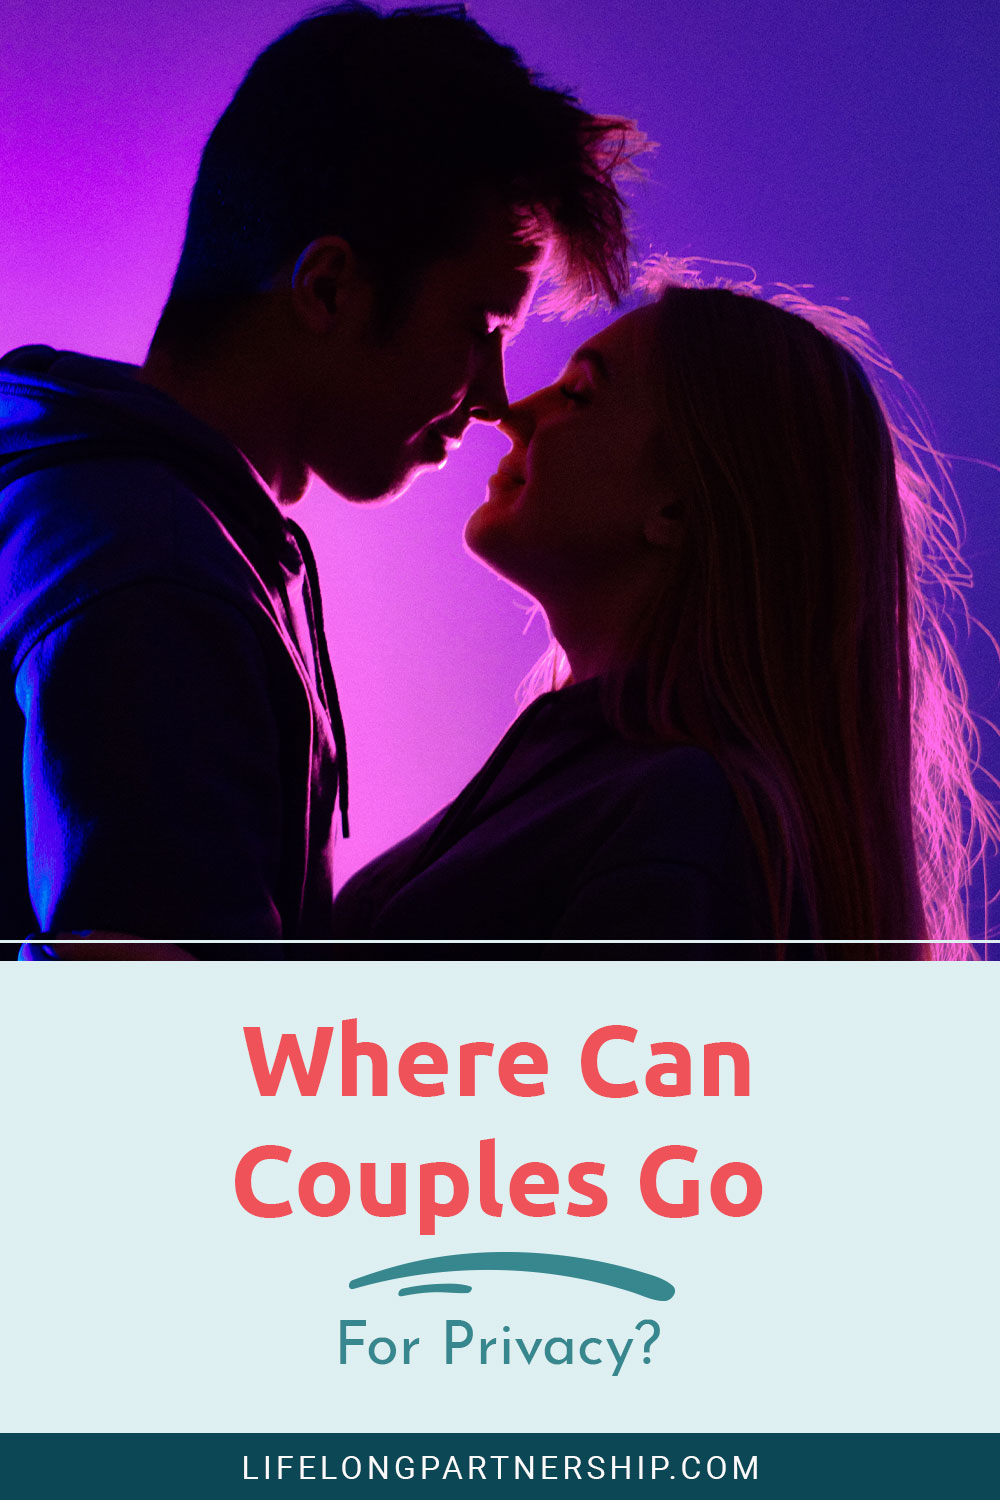 Where Can Couples Go For Privacy?